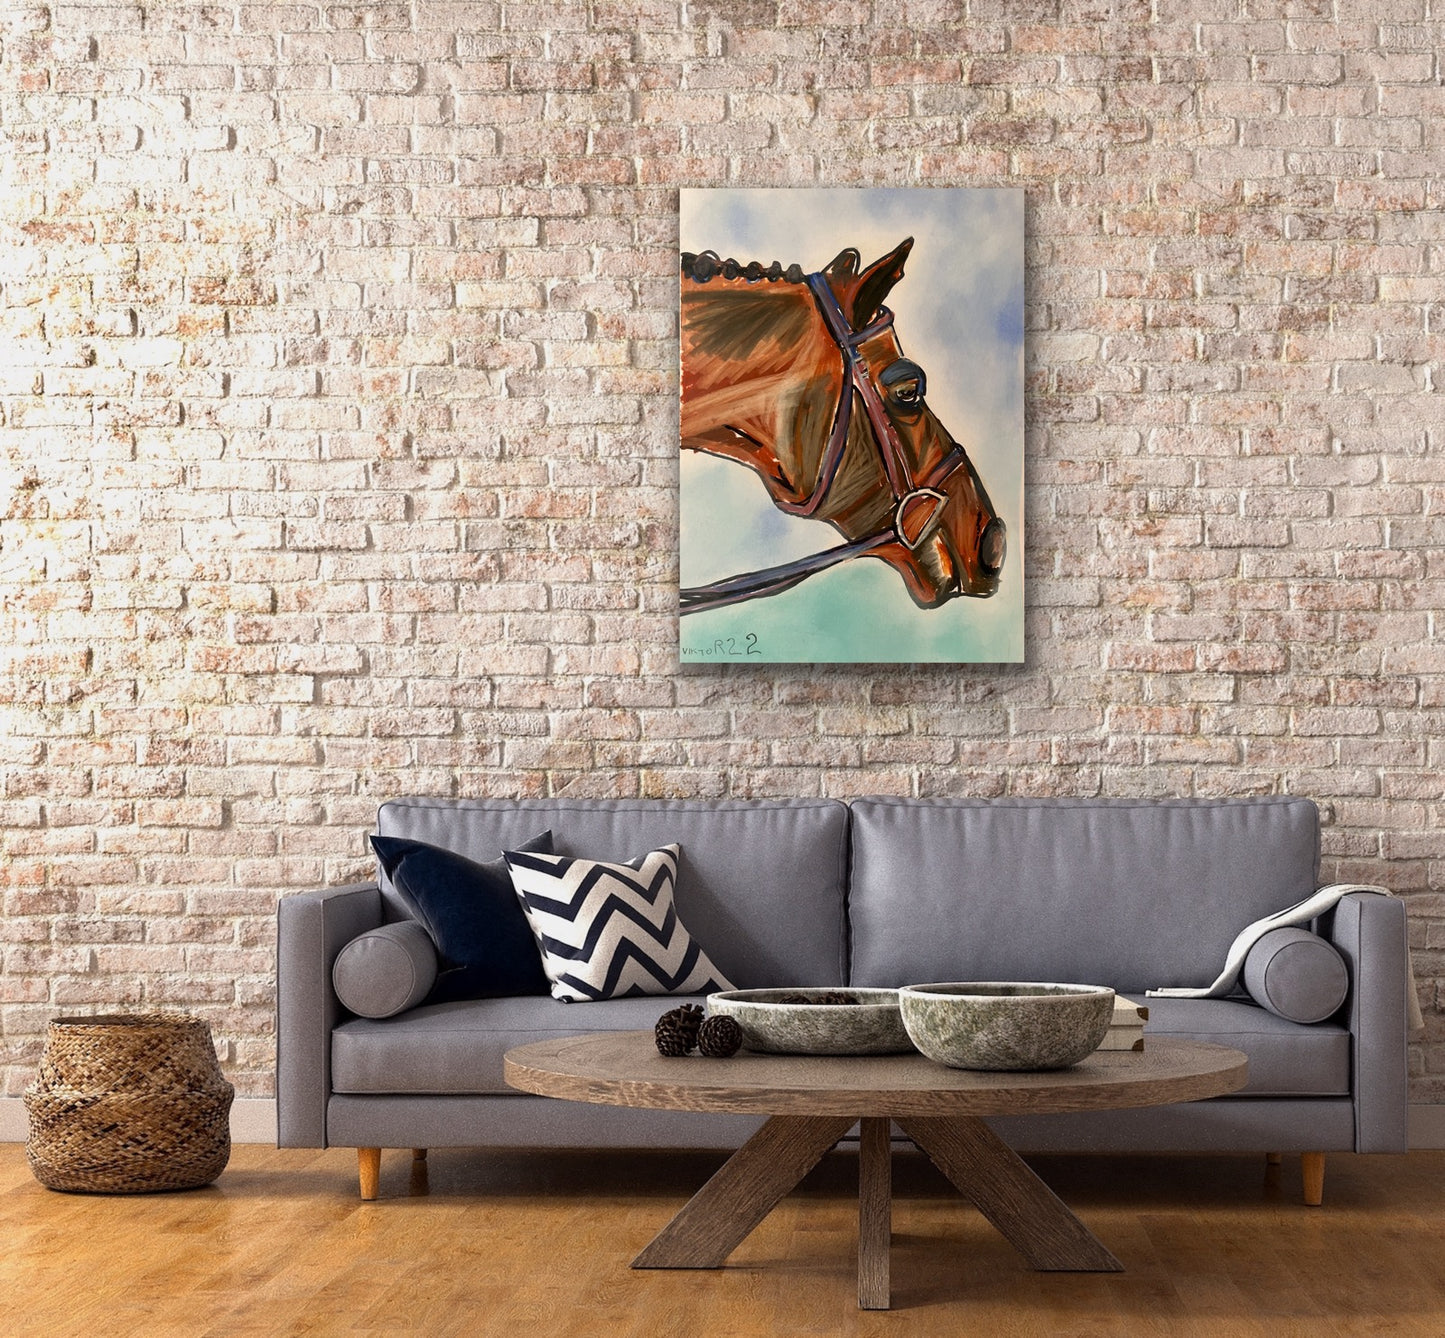 Lovely Horse - Stretched Canvas Print in more sizes